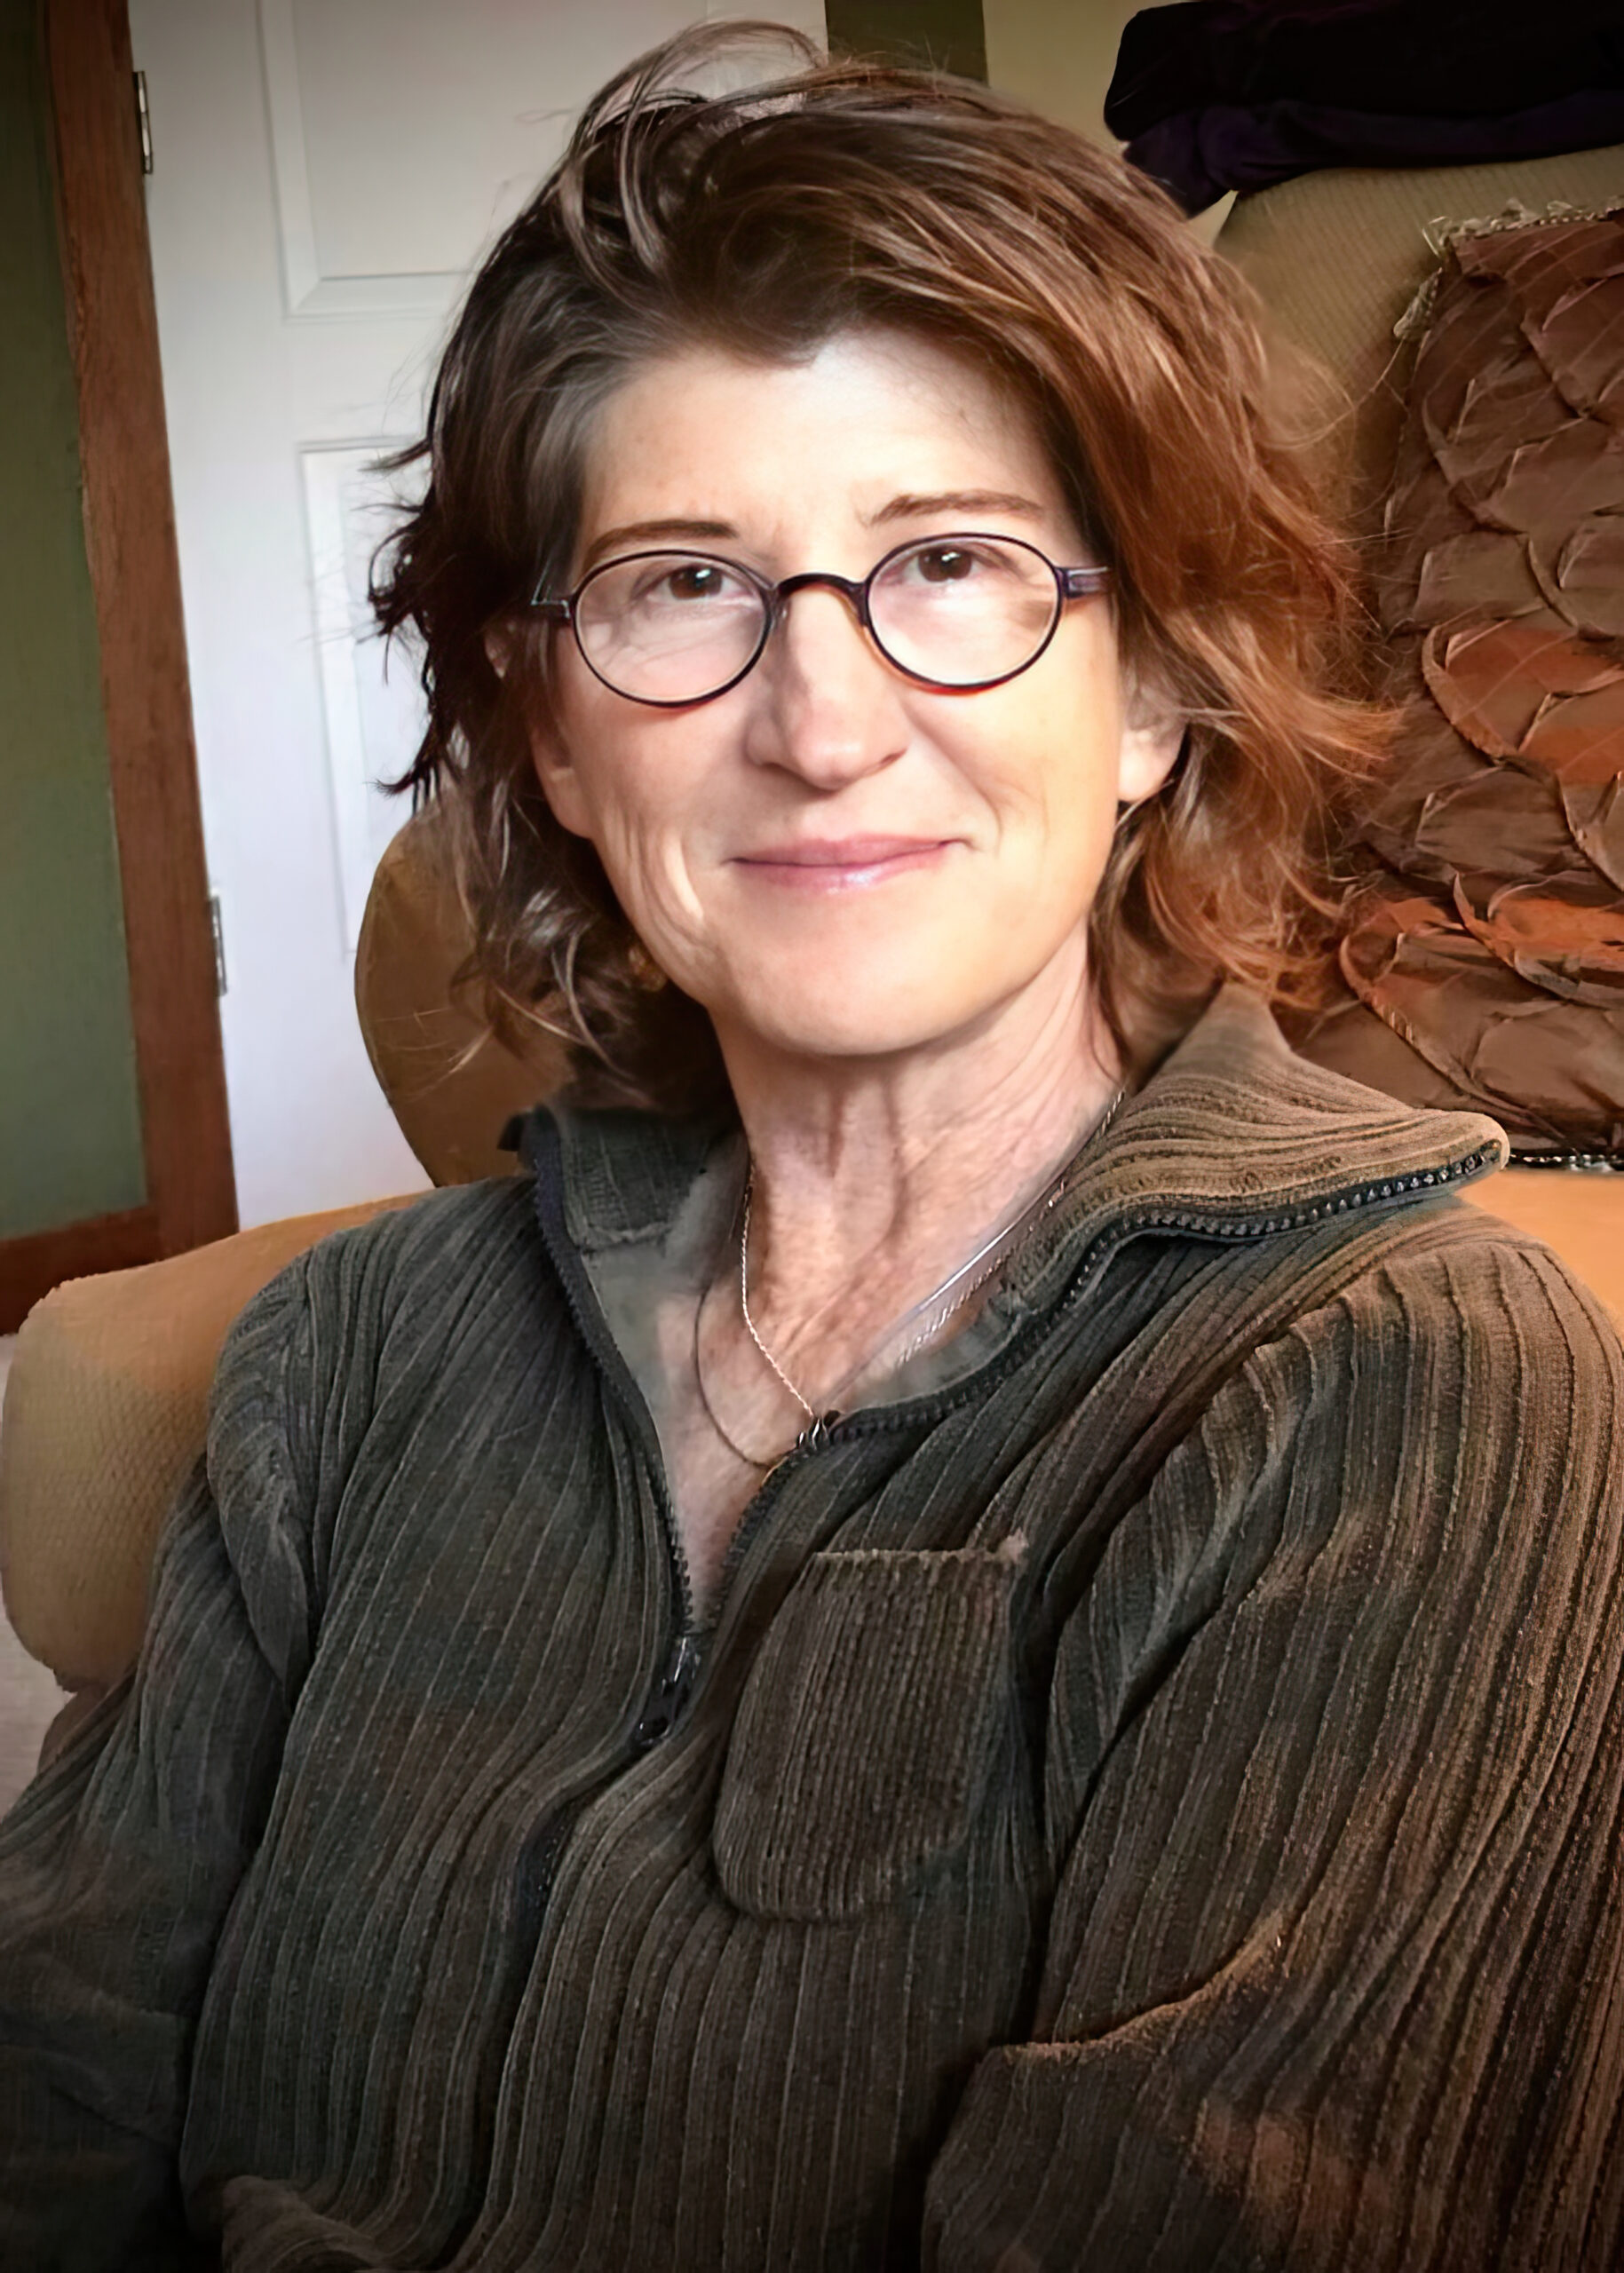 A woman in glasses sitting on a couch.